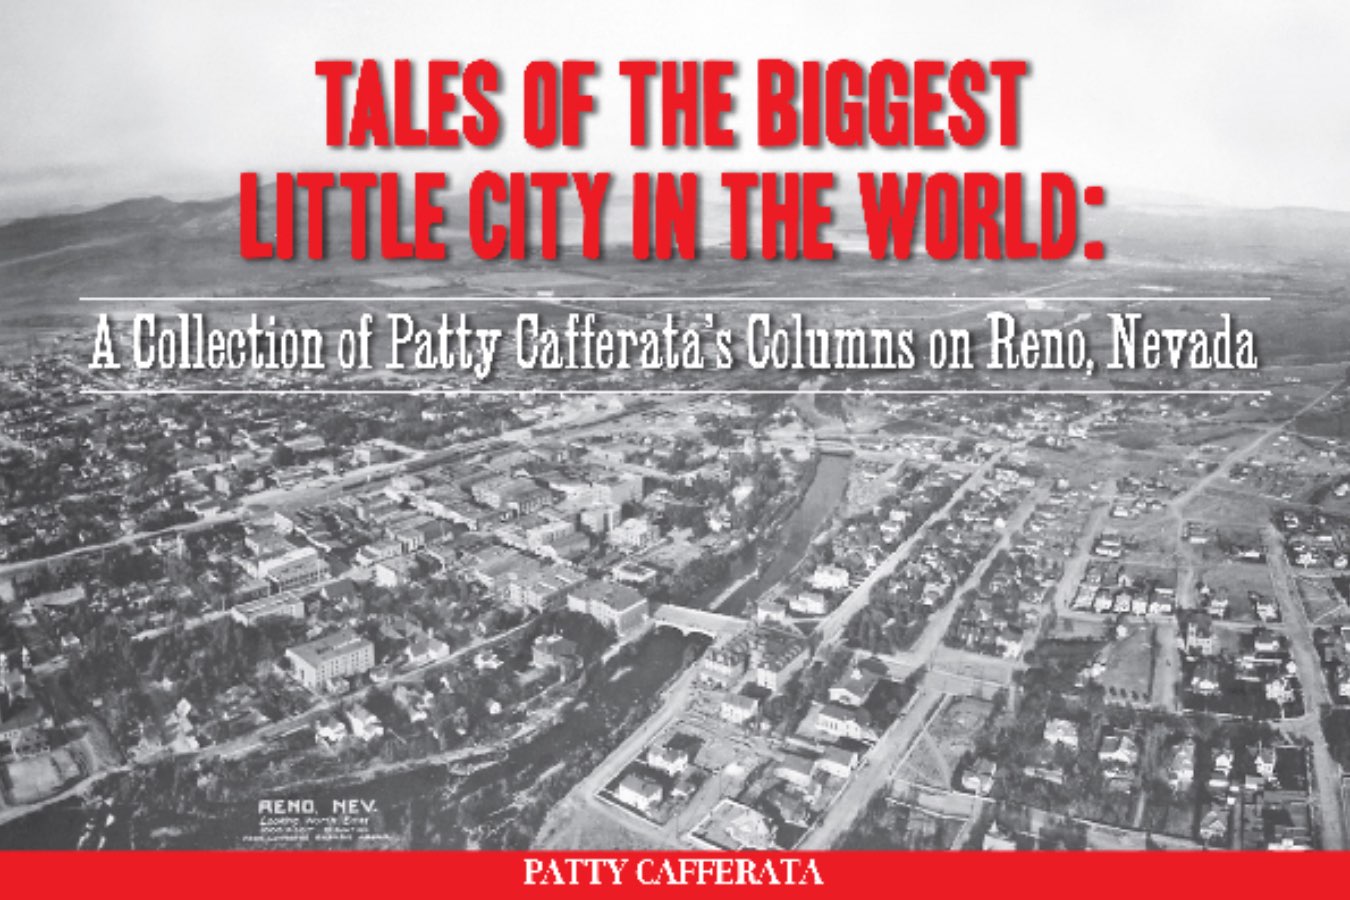 Tales of the Biggest Little City in the World: A Collection of Patty Cafferata's Columns on Reno, Nevada, Volume I Image